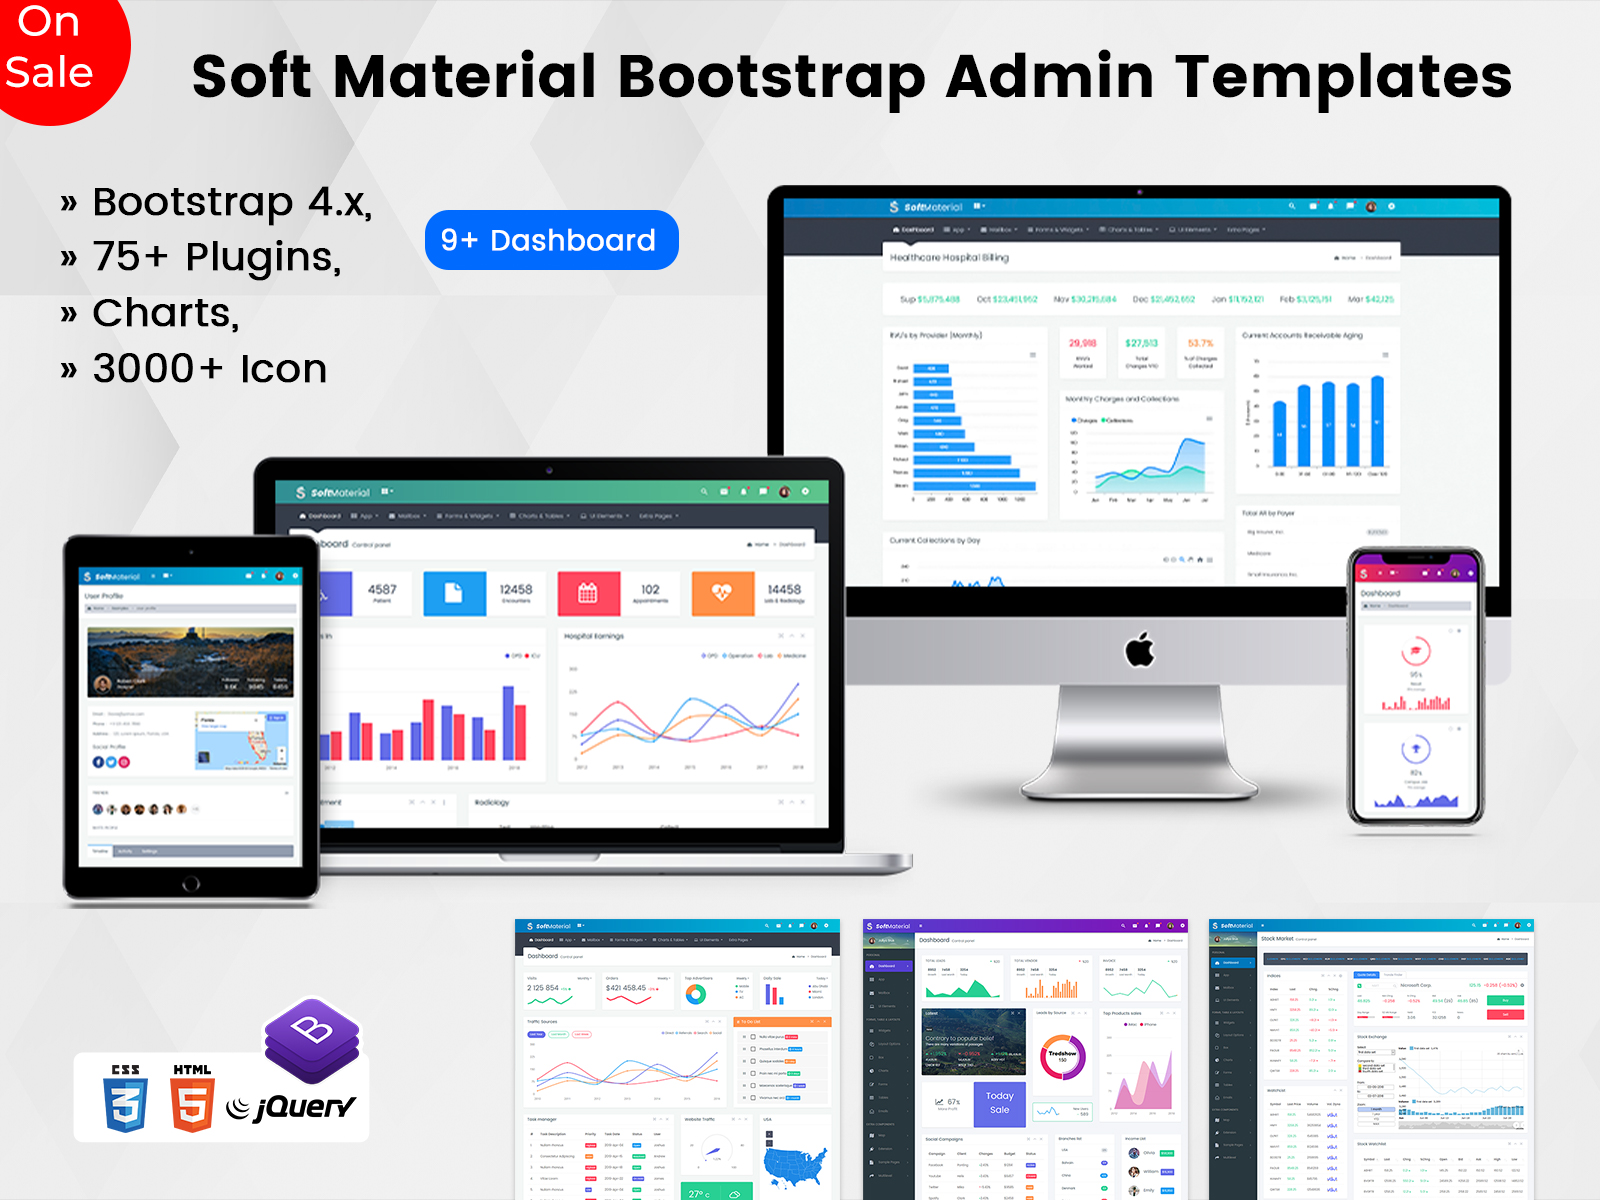 Soft Material – Bootstrap Admin Web App With Admin Templates